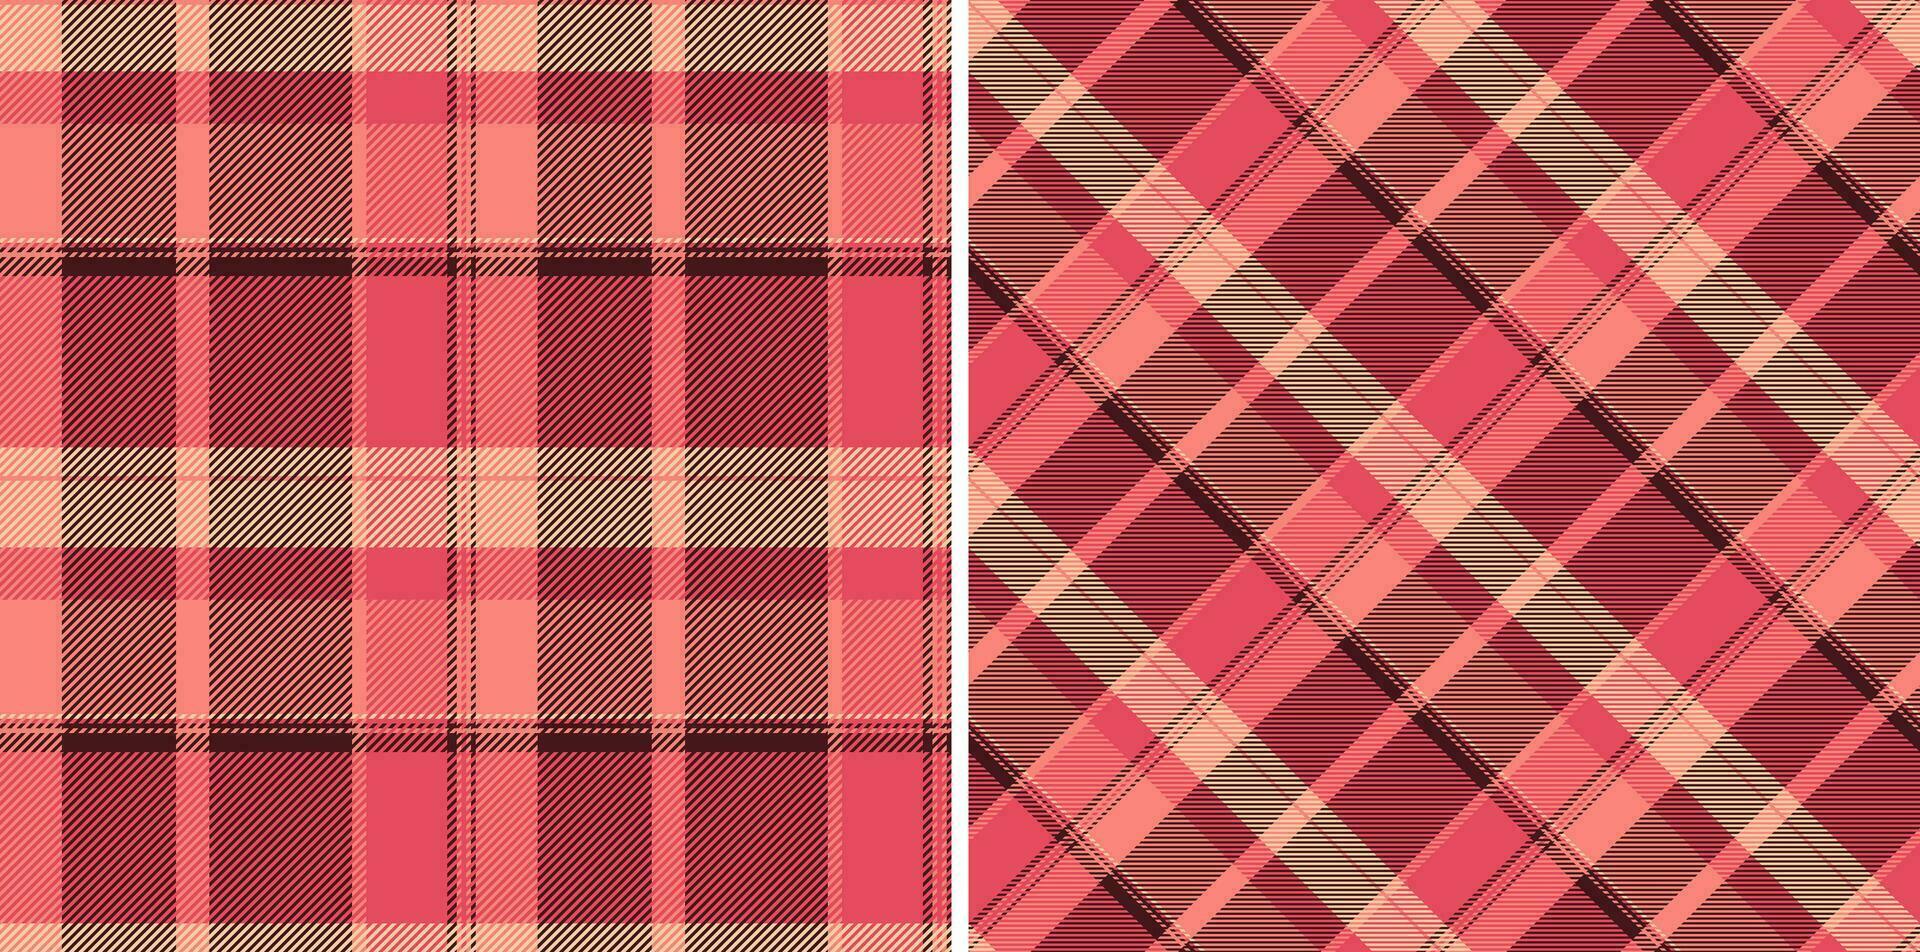 Texture check plaid of seamless vector background with a pattern textile tartan fabric.